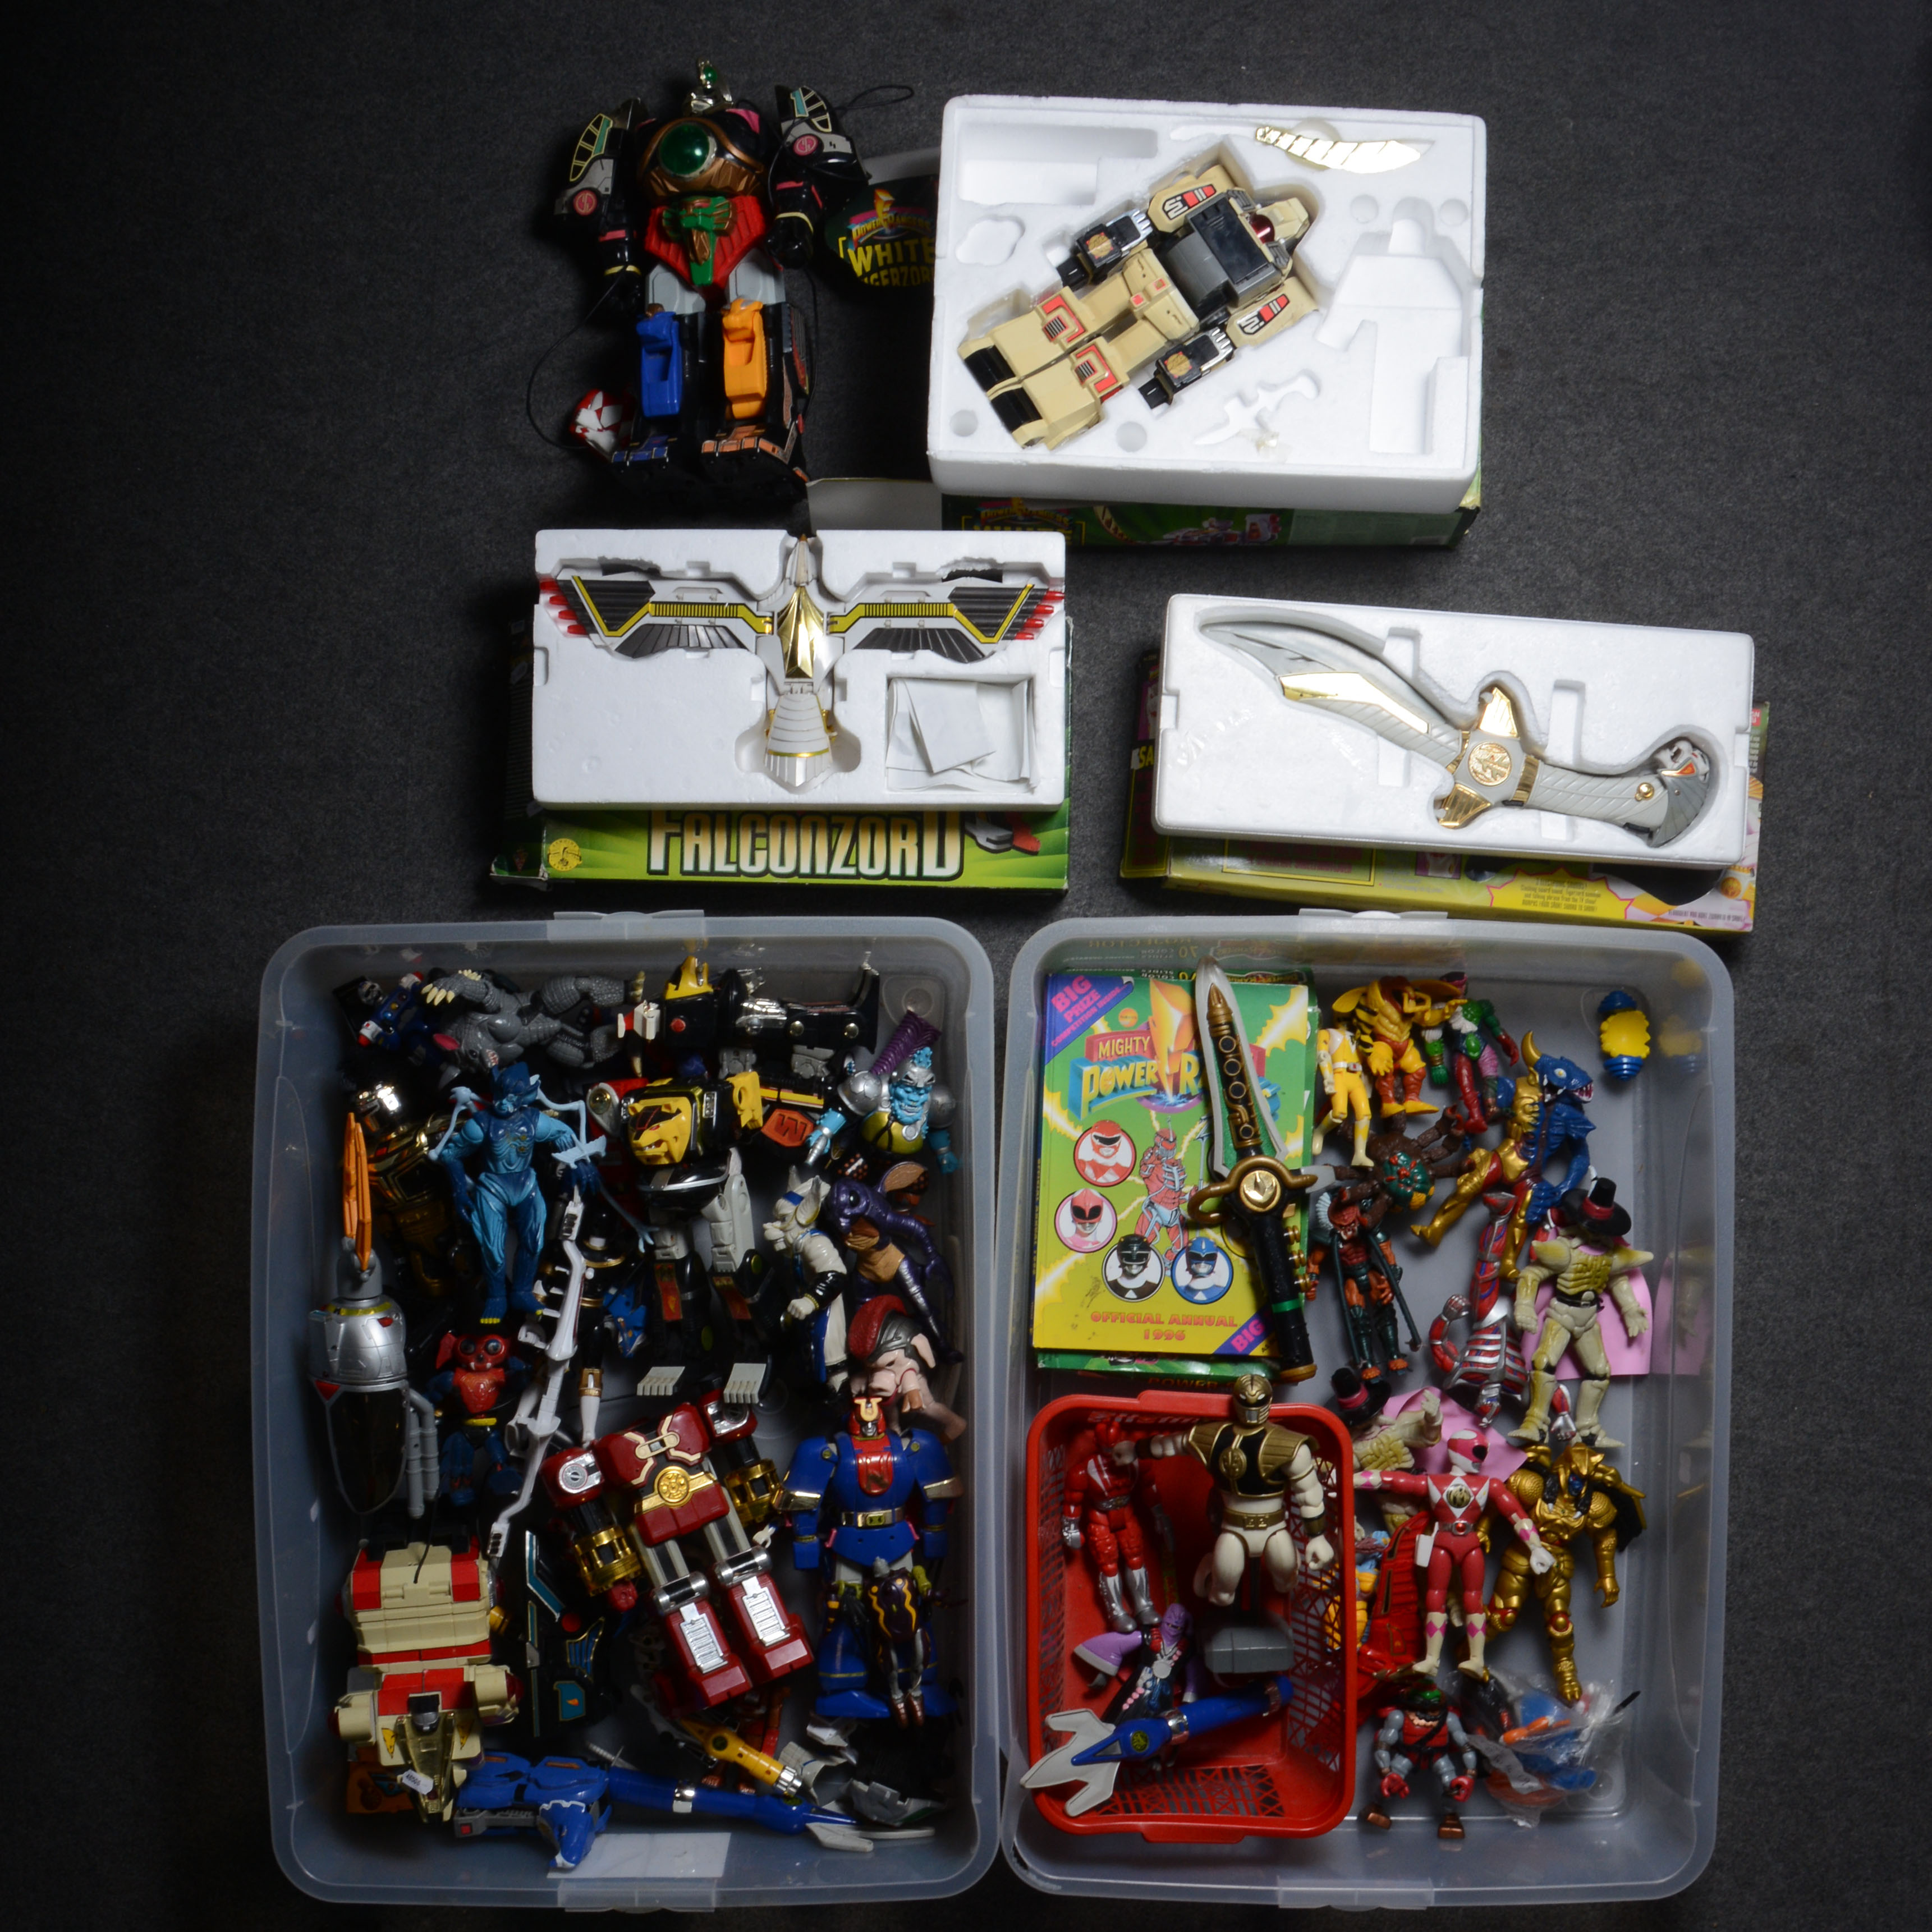 Power Ranger by BanDai, Irwin and others, including The Talking Tiger Saber and loose.